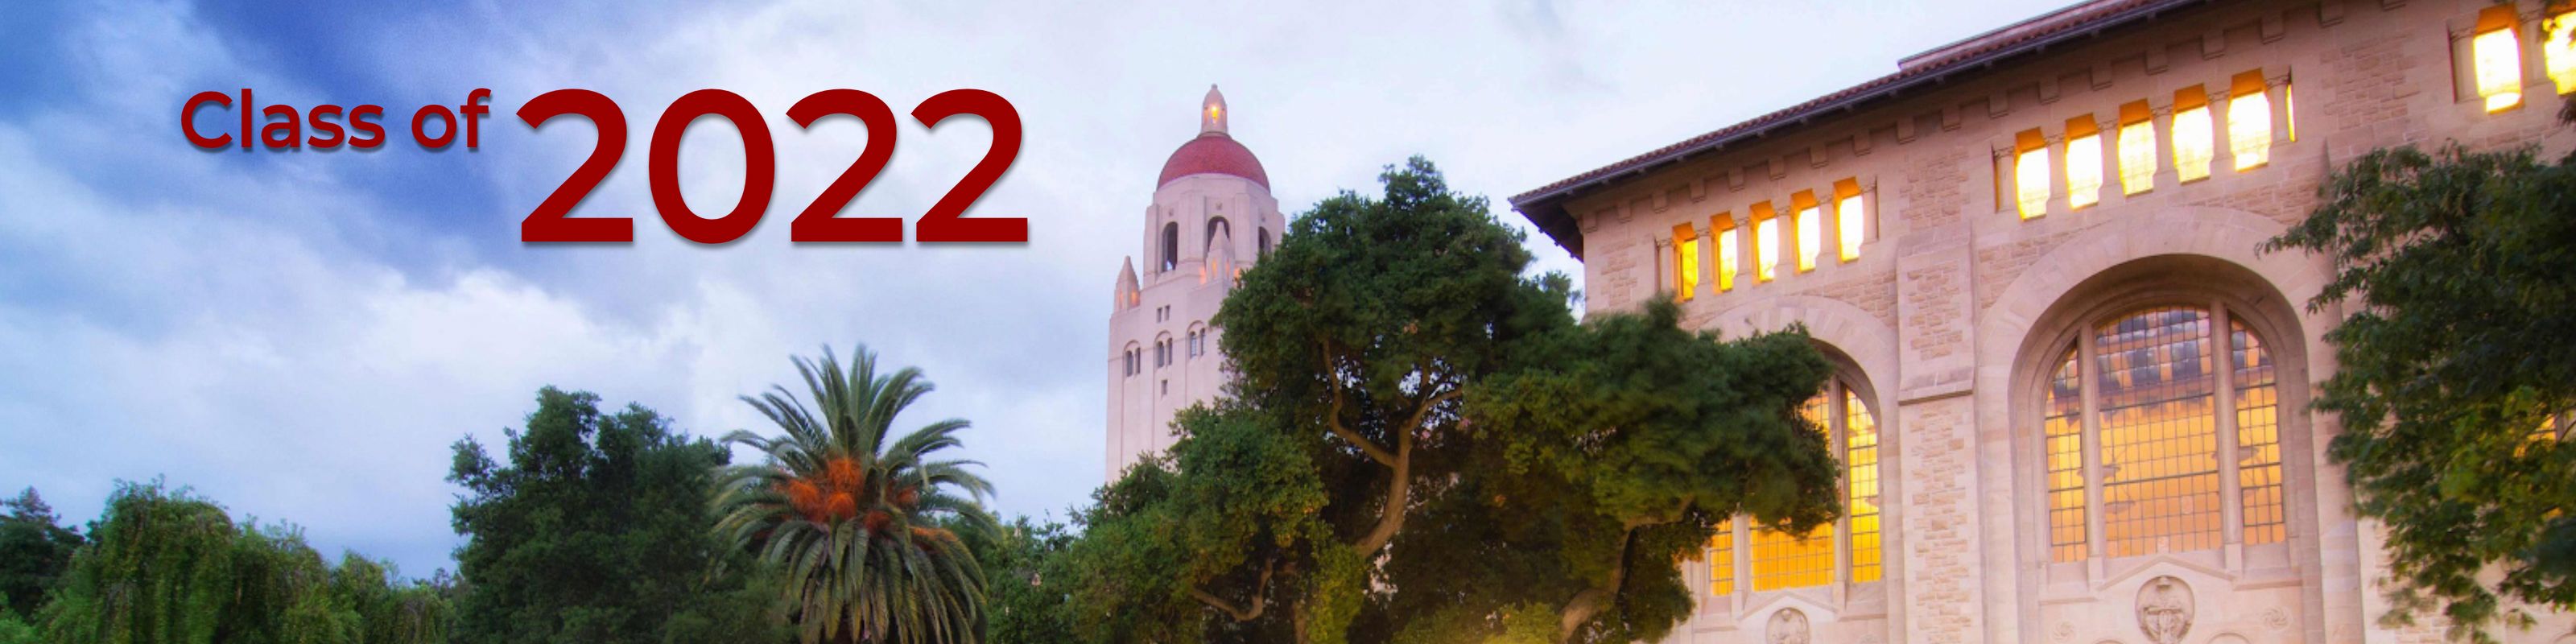 Stanford Class of 2022